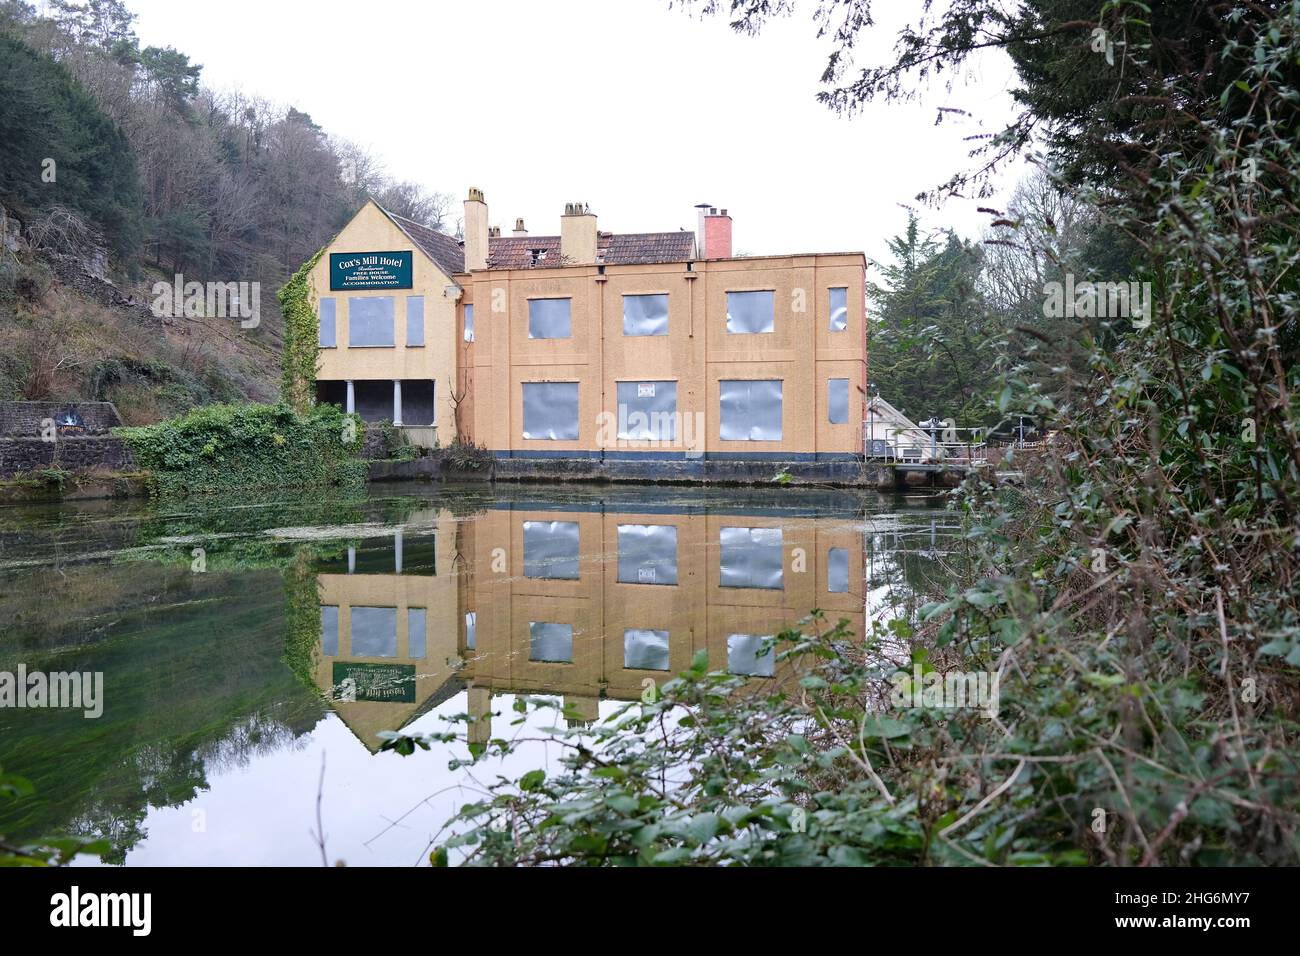 January 2022 - Cox's Mill hotel, now a crumbling shell in the village Cheddar, Somerset, England, UK. Stock Photo